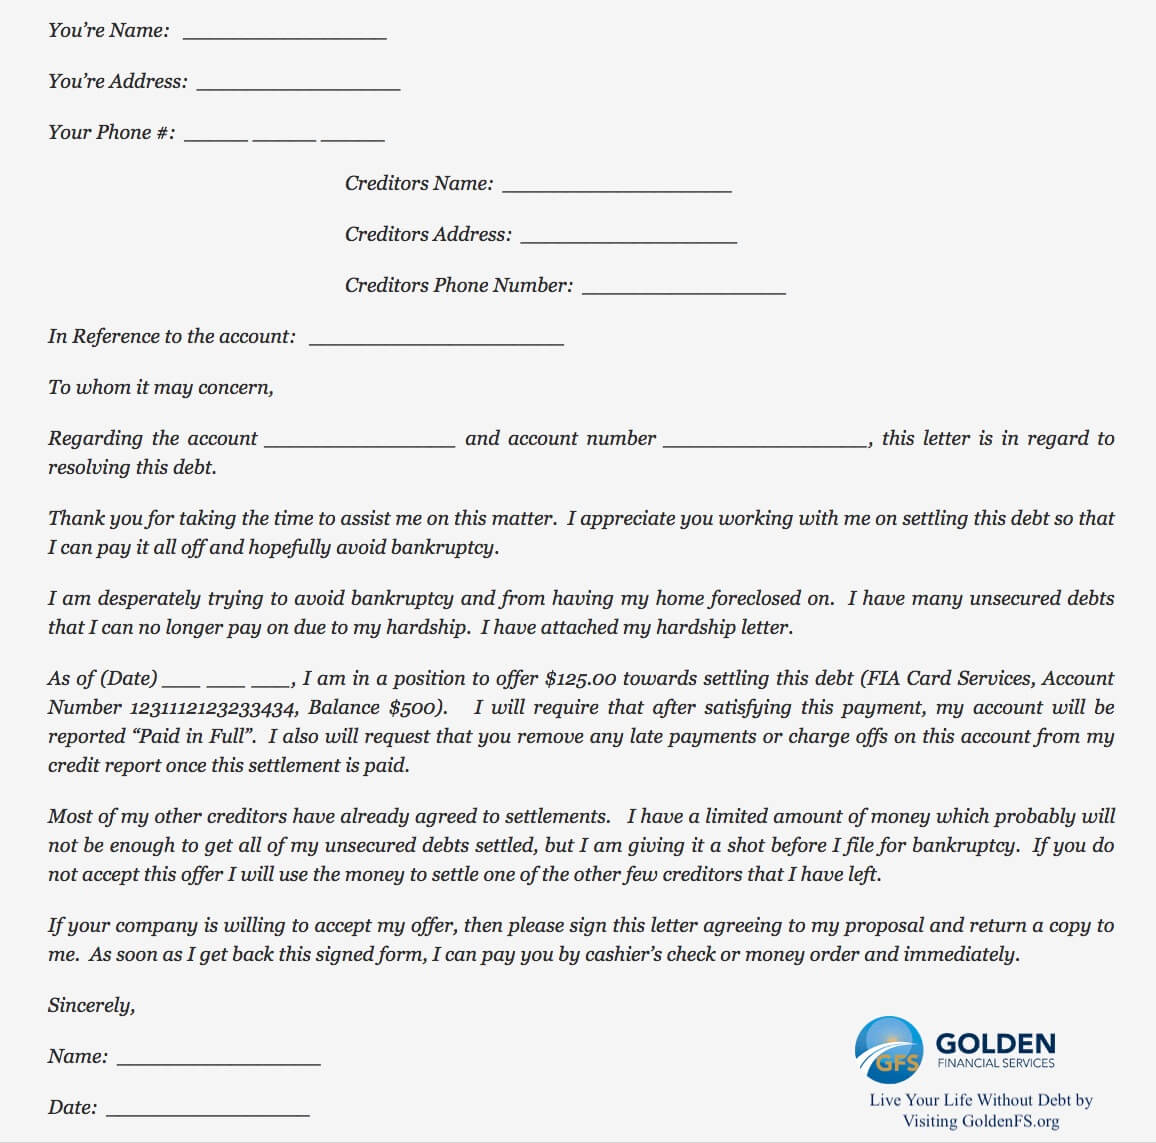 Sample Debt Collection Letter By Attorney from goldenfs.org